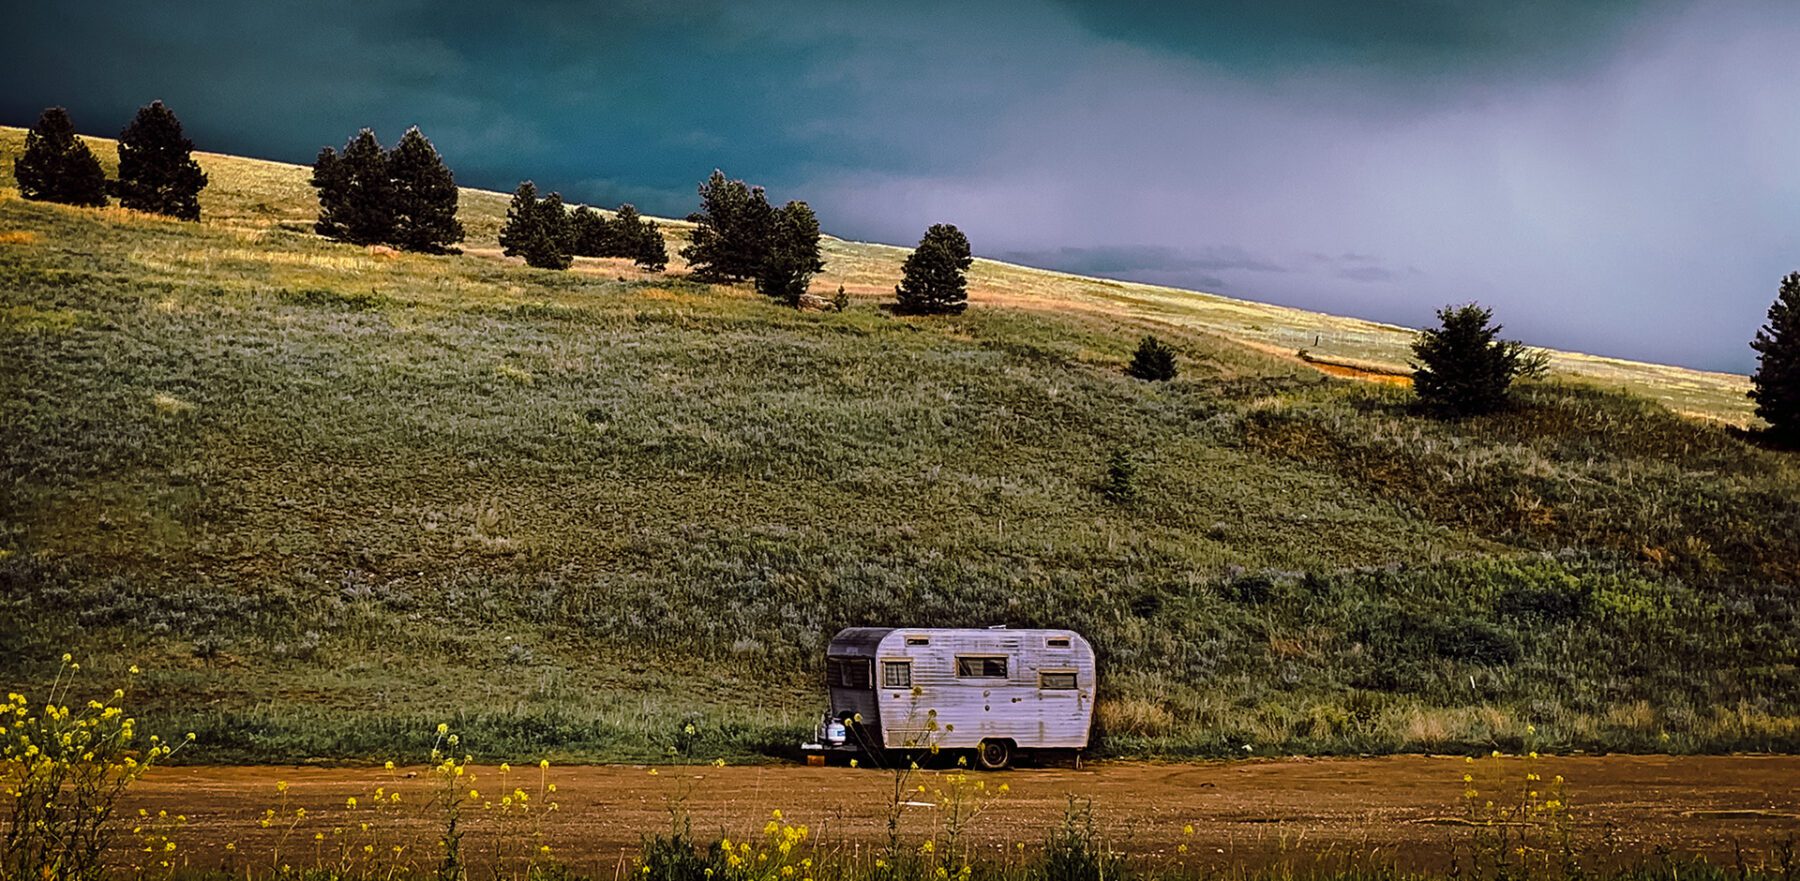 A Montana sits on a hill under a stormy sky.